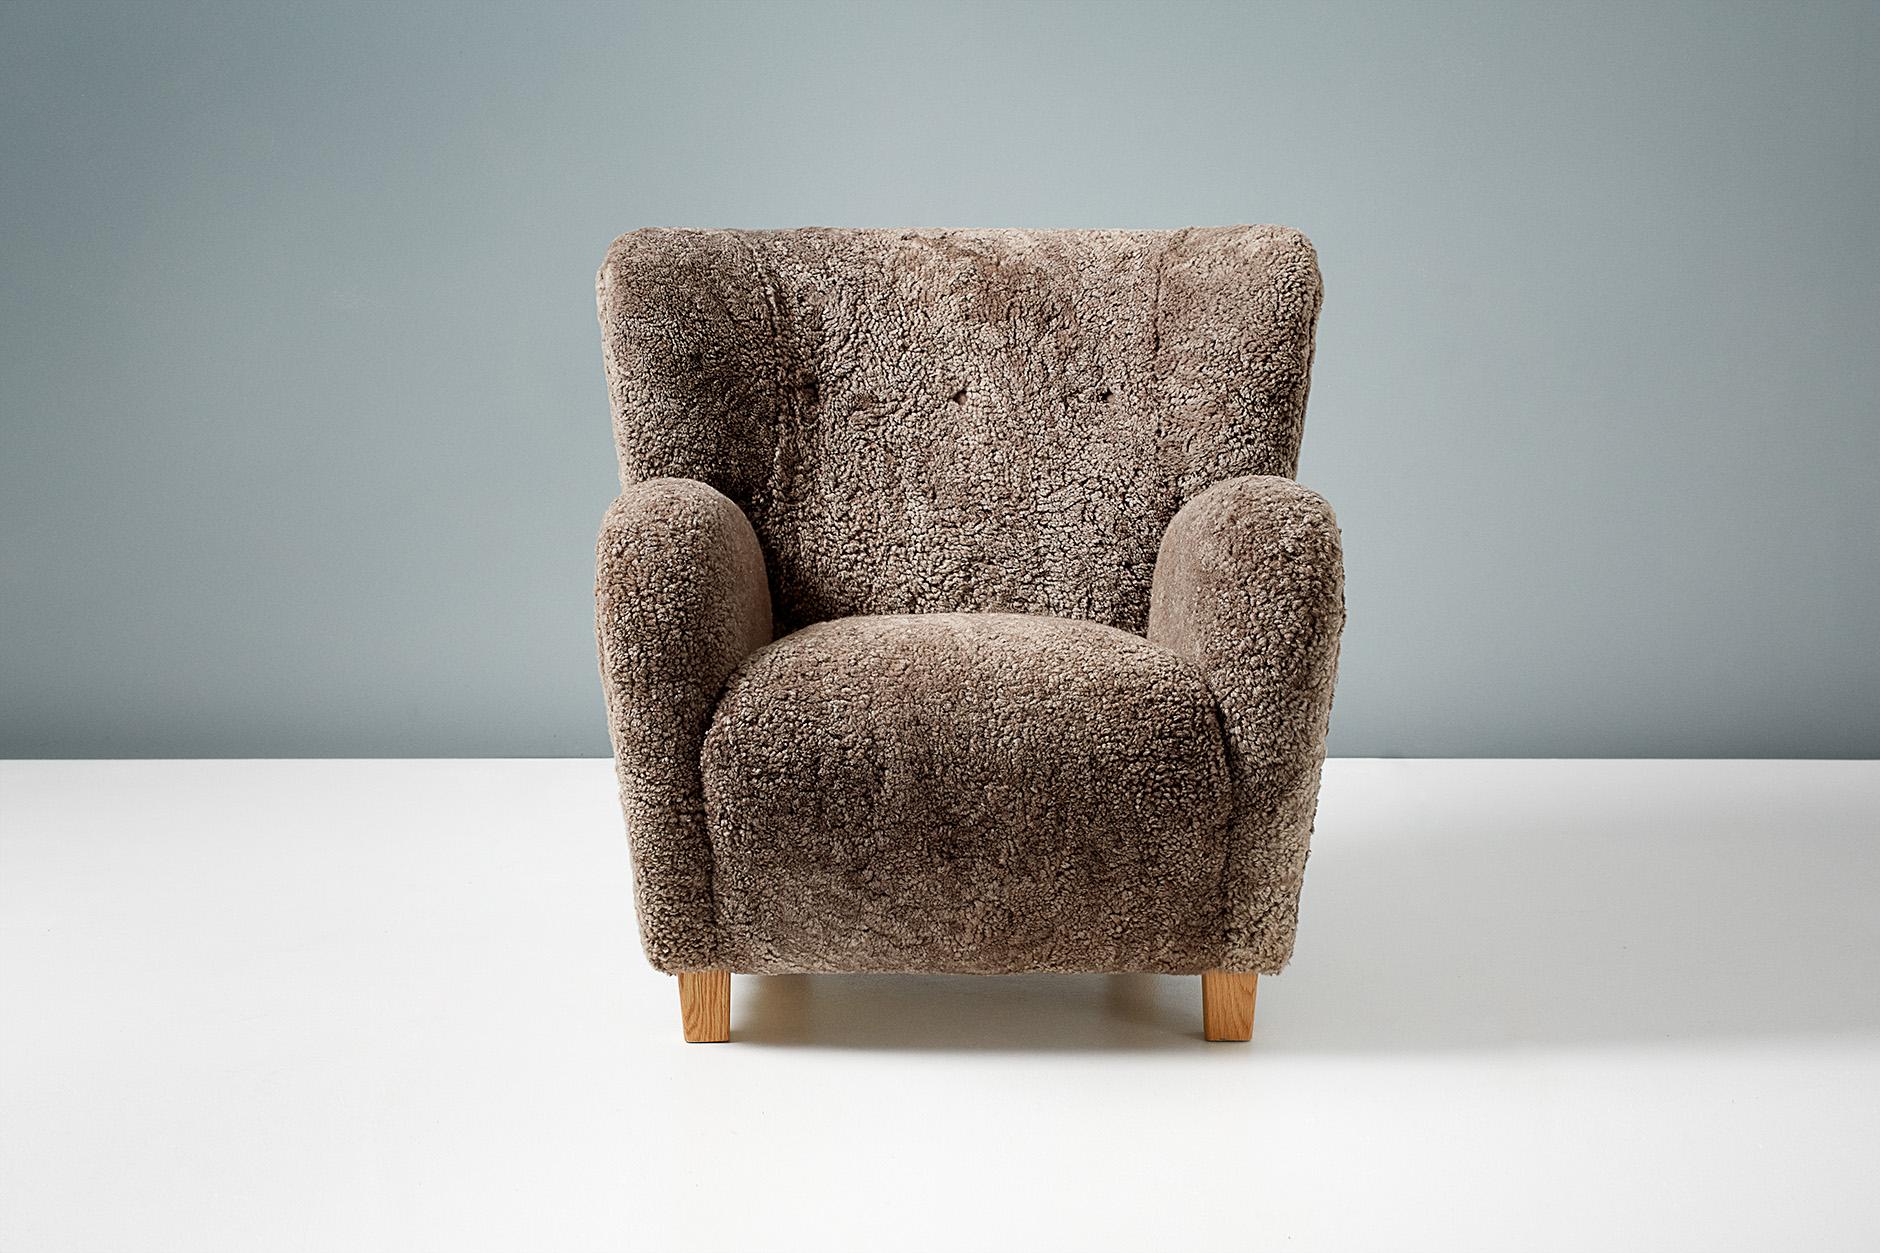 Dagmar design

Karu lounge chair

A pair of custom made lounge chairs developed and produced at our workshops in London using the highest quality materials. These examples are upholstered in ‘Sahara’ shearling and feature oiled European oak